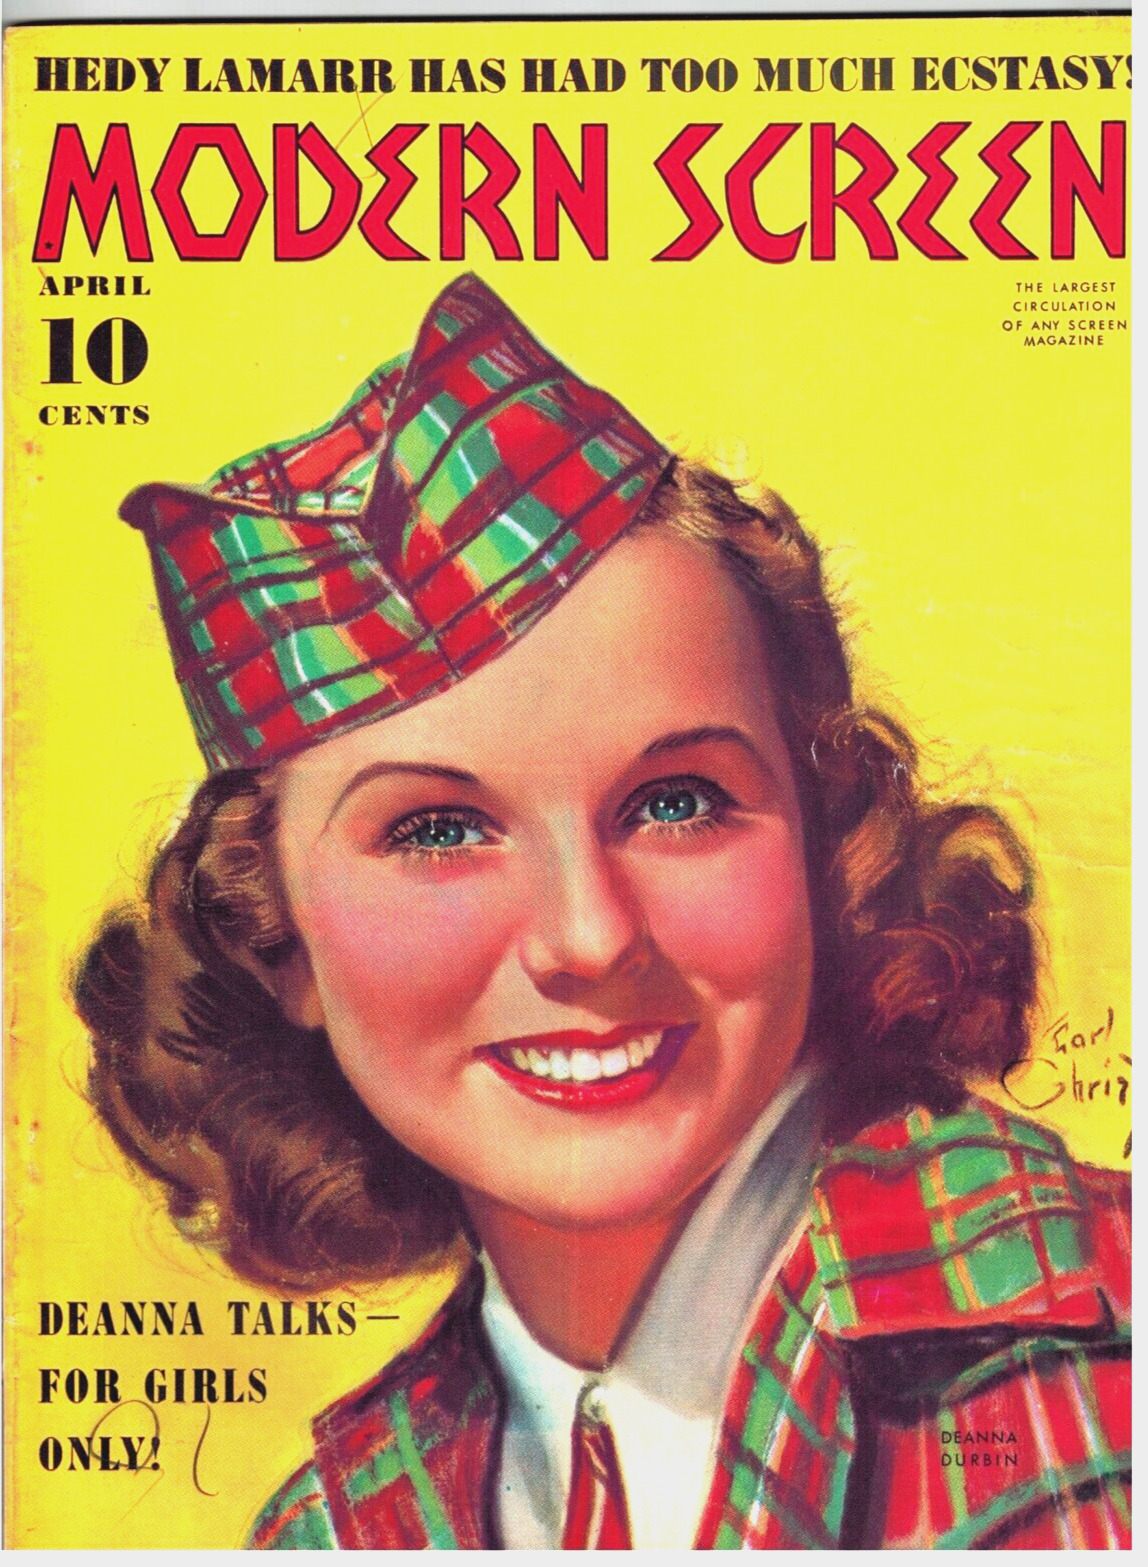 Modern Screen of April 1939 Beautiful  Cover by EARL CHTISTY of DEANNA DURBIN